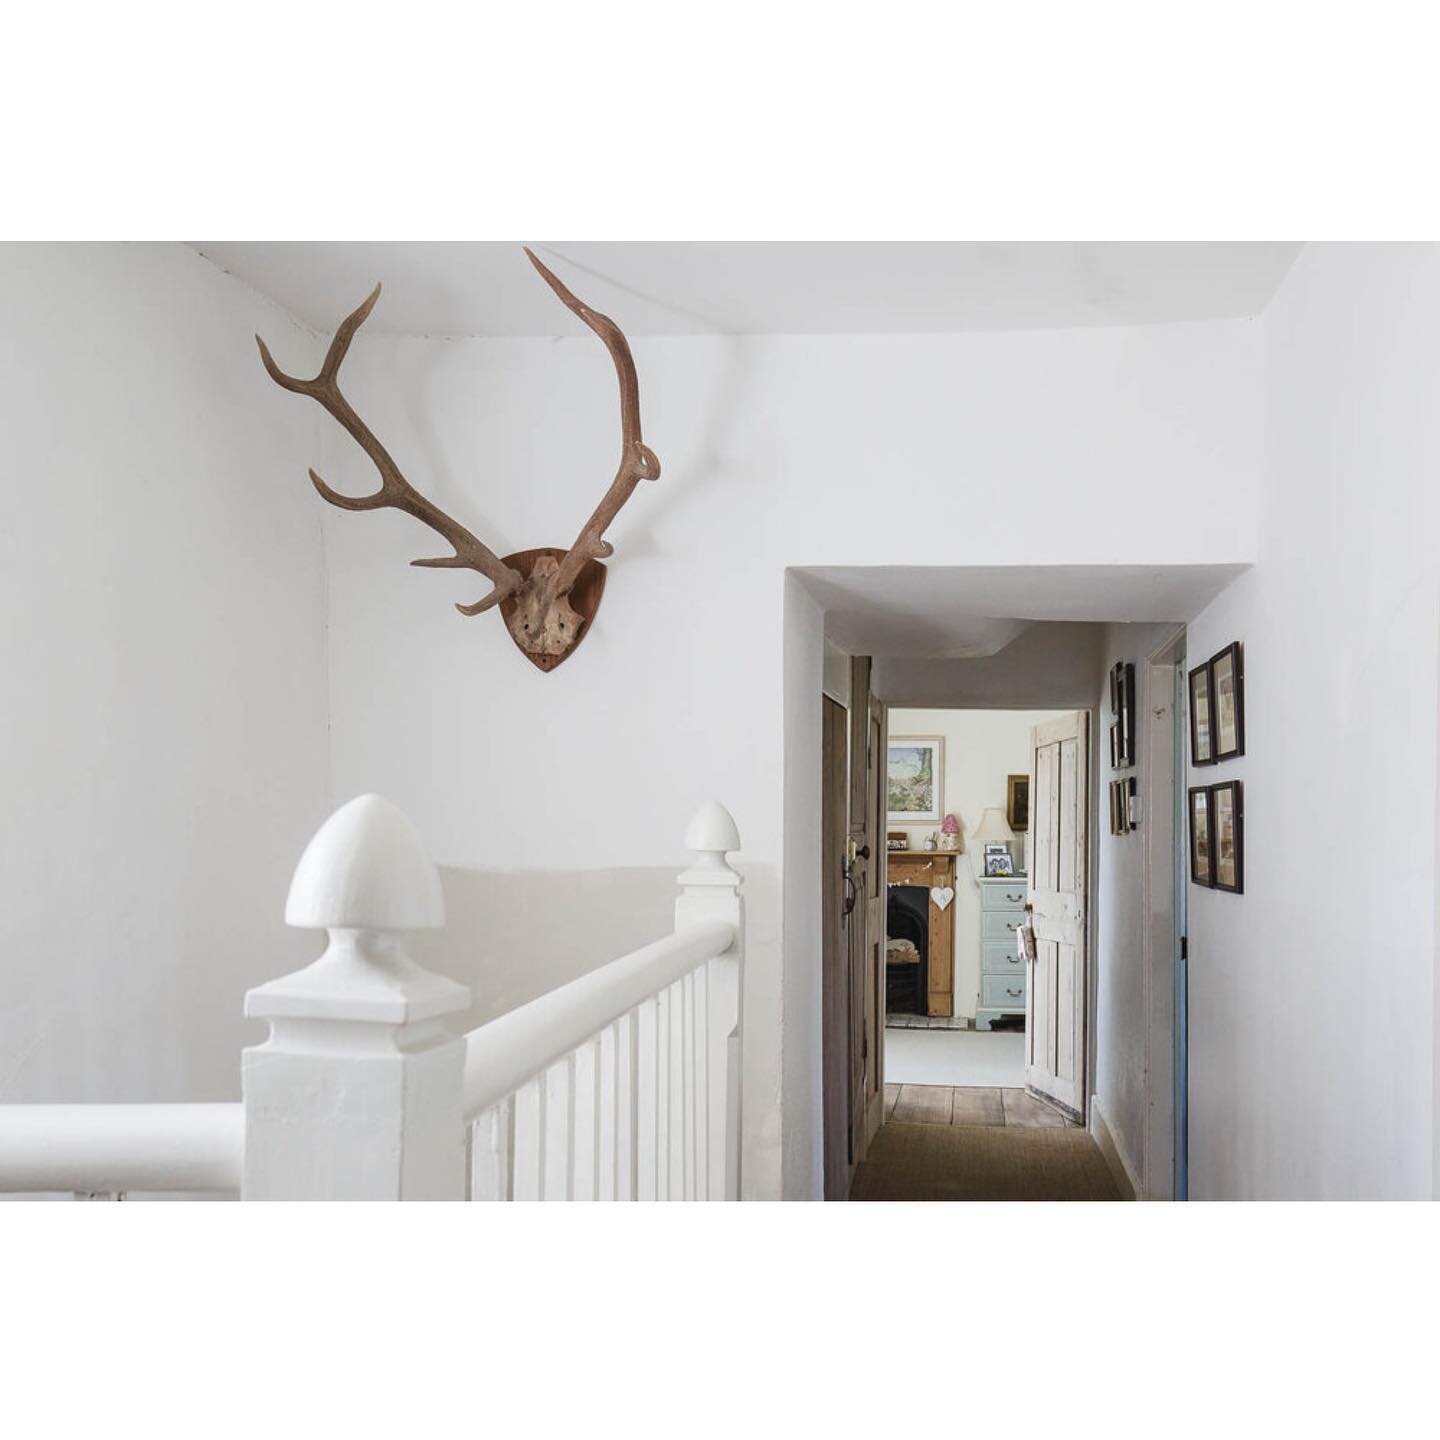 Less is sometimes more.  The plain white decor with the wooden floor and original pine doors works well on the landing of this traditional farmhouse.  We are drawn to the bedroom down the corridor. I love the period touches to the children's bedroom 